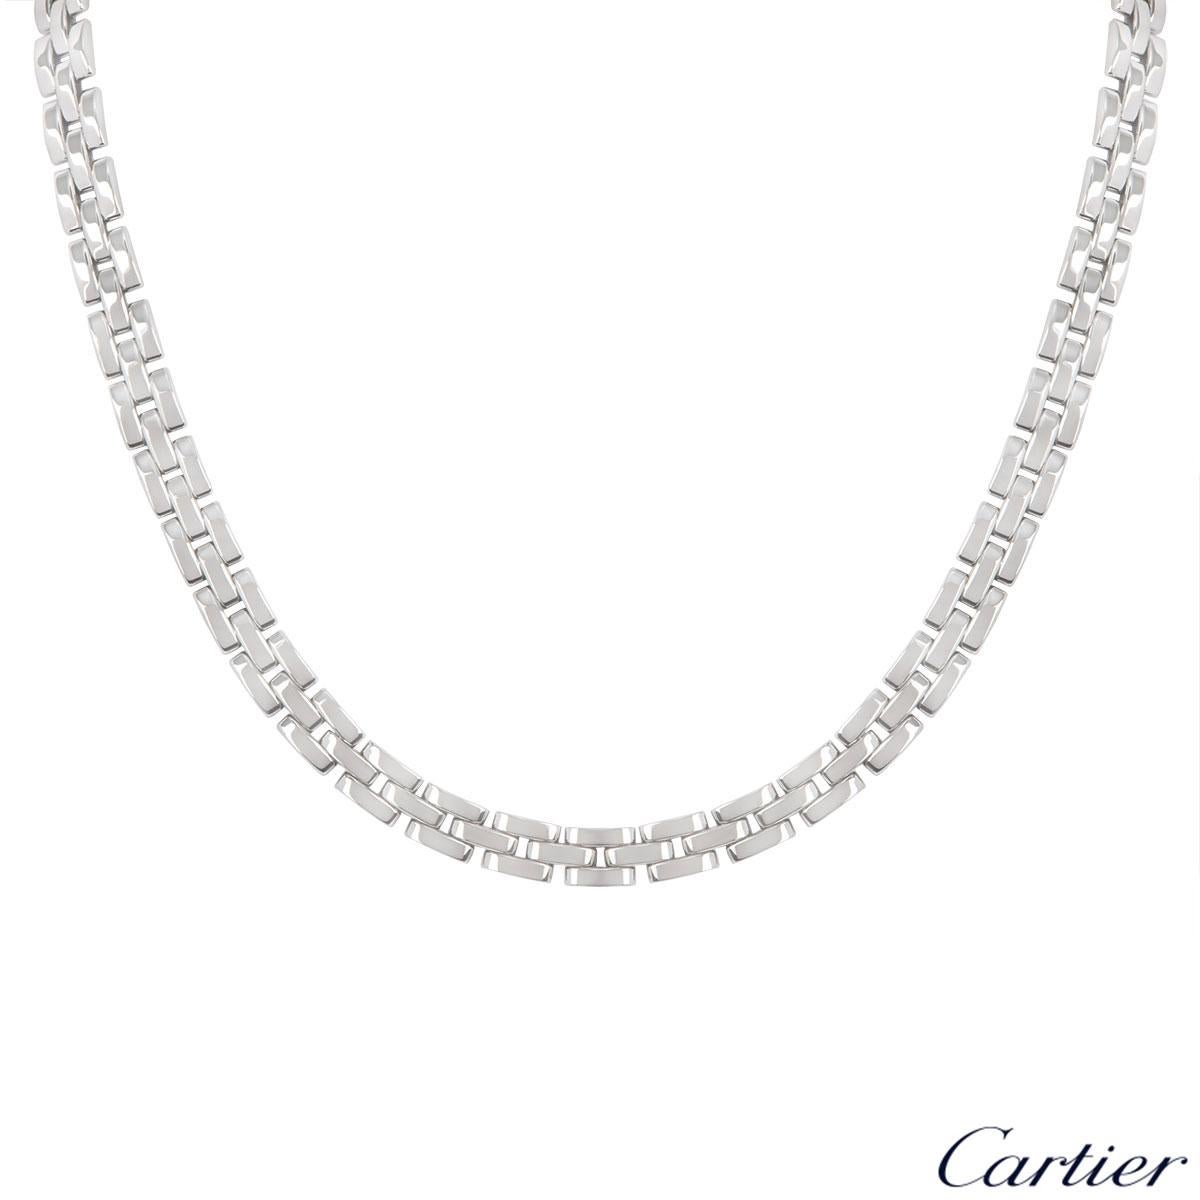 A stunning 18k white gold necklace by Cartier from the Maillon Panthere collection. The necklace comprises of the classic Cartier flat solid links in a 3 row brickwork design. The necklace measures 20.00 inches in length and features a box clasp